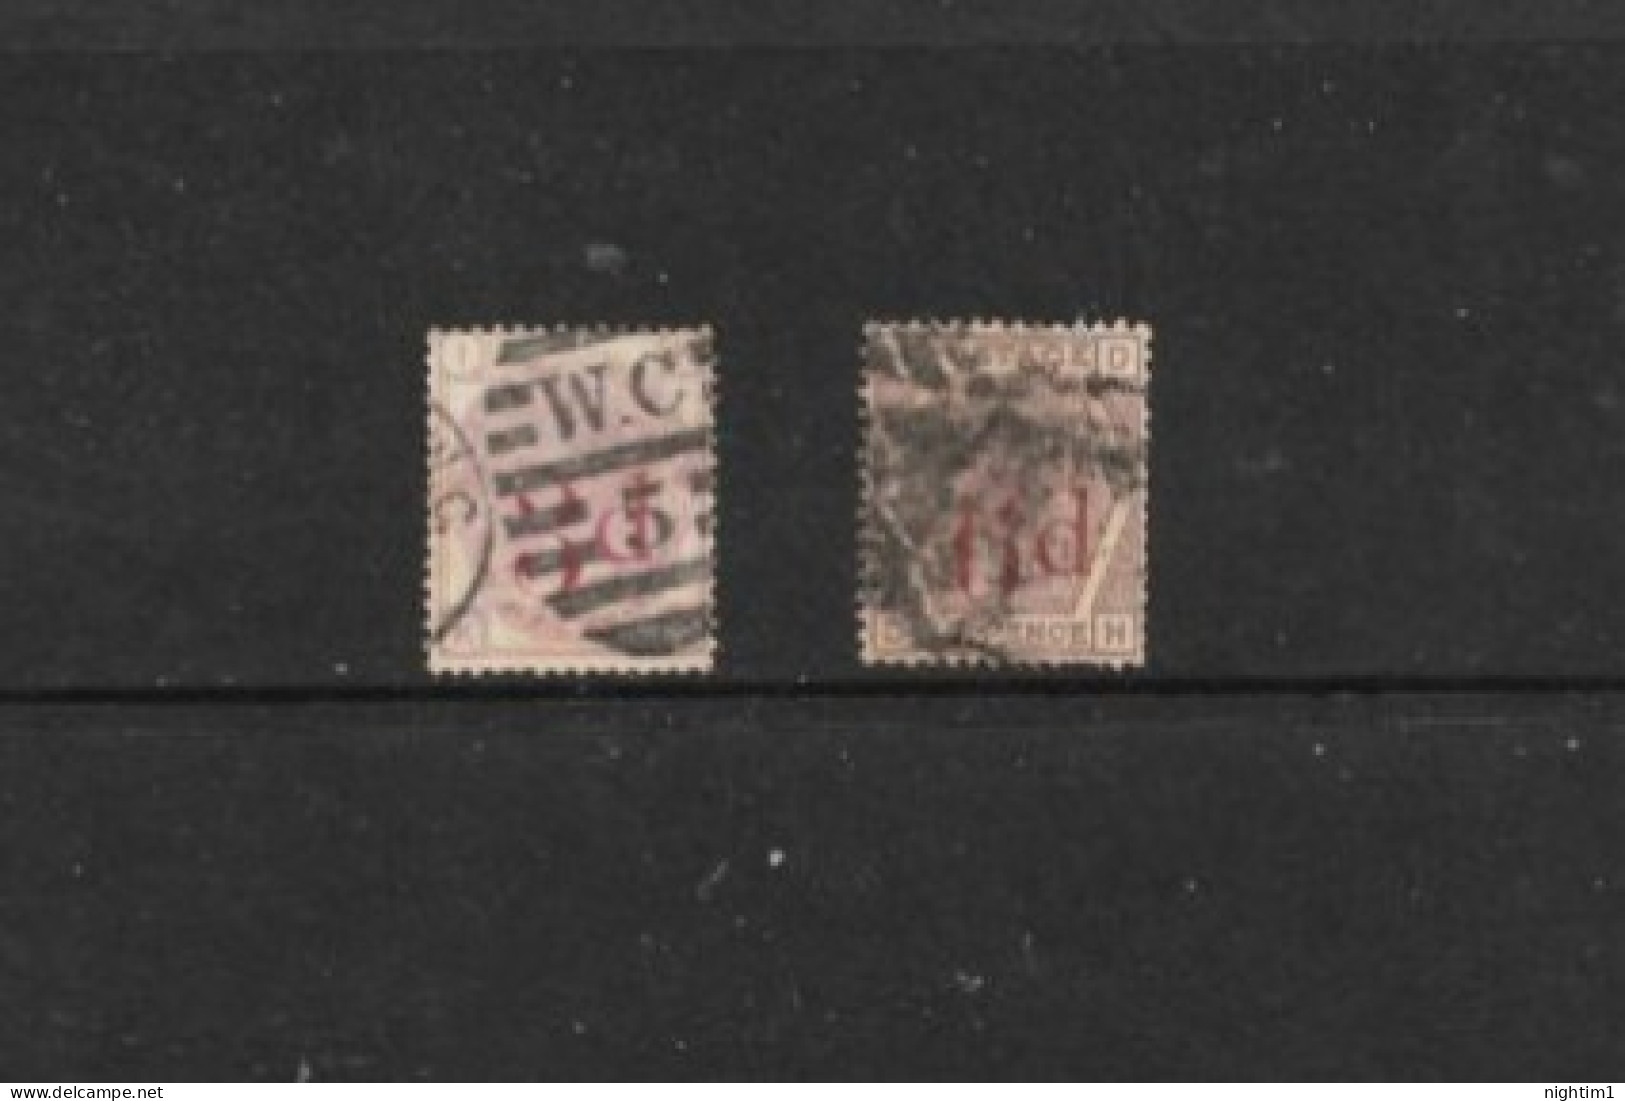 GREAT BRITAIN COLLECTION.  3d ON 3d AND 6d ON 6d. TWO STAMPS. - Gebraucht